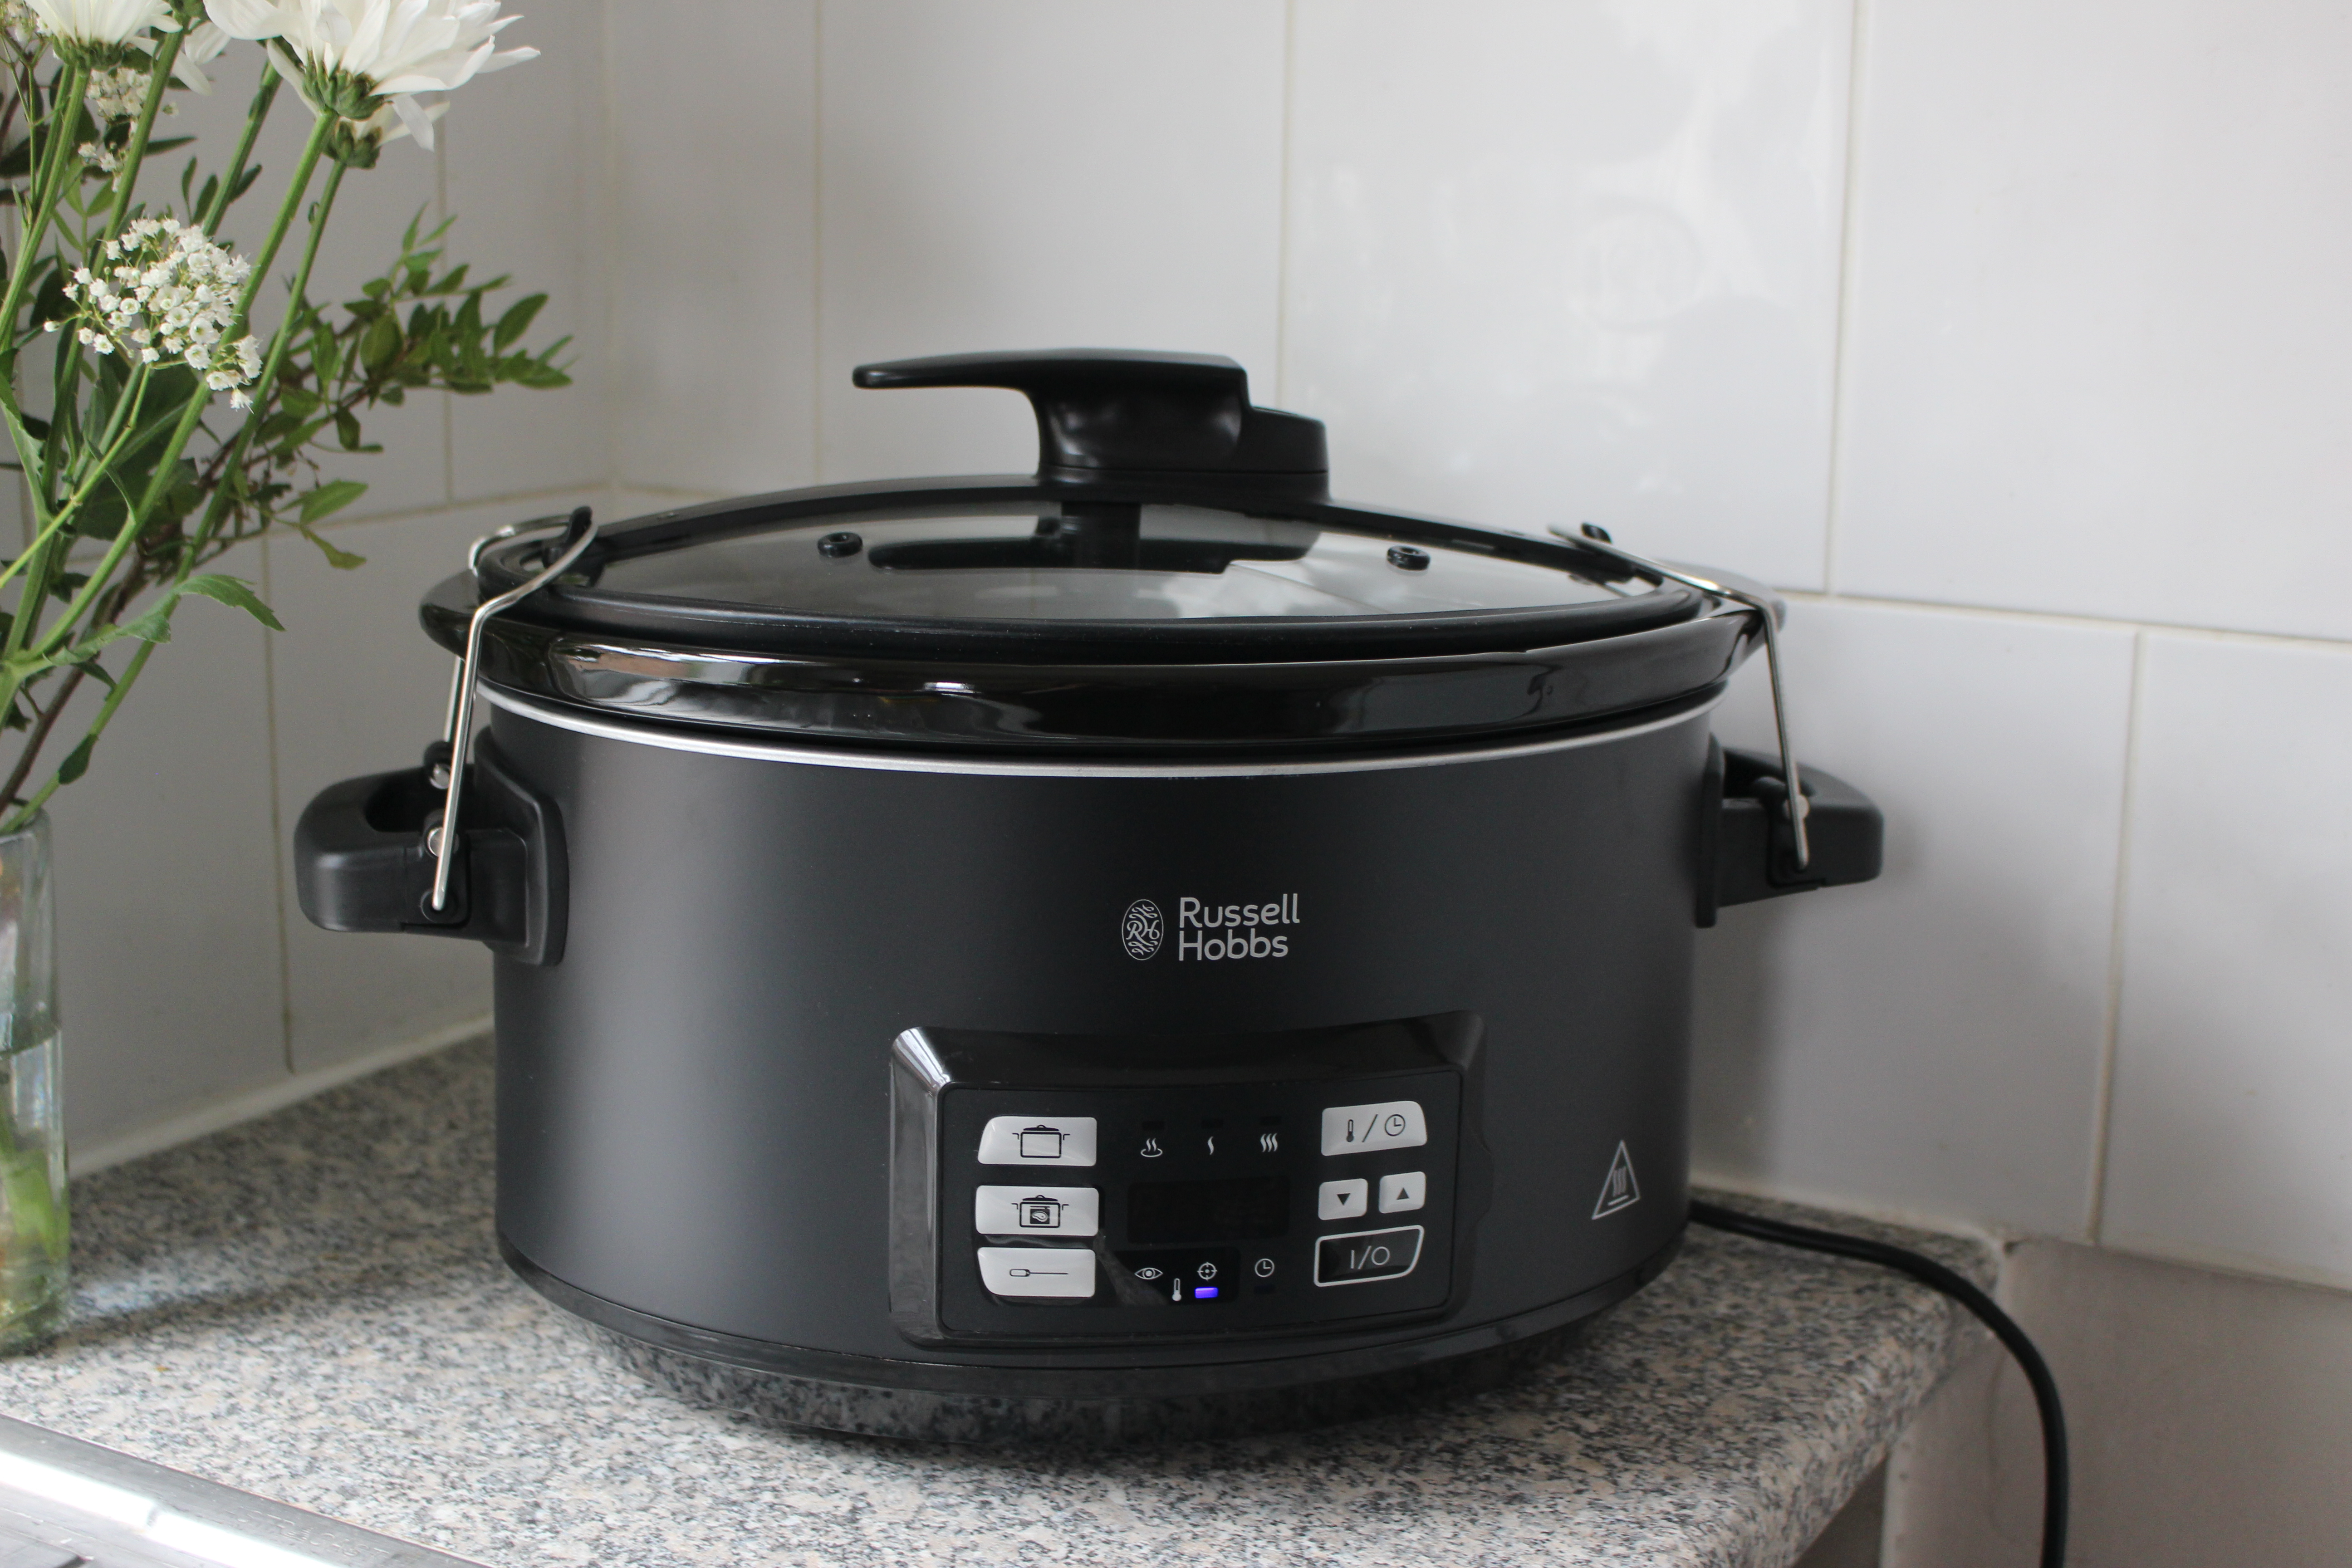 Russell Hobbs Sous Vide Slow Cooker review